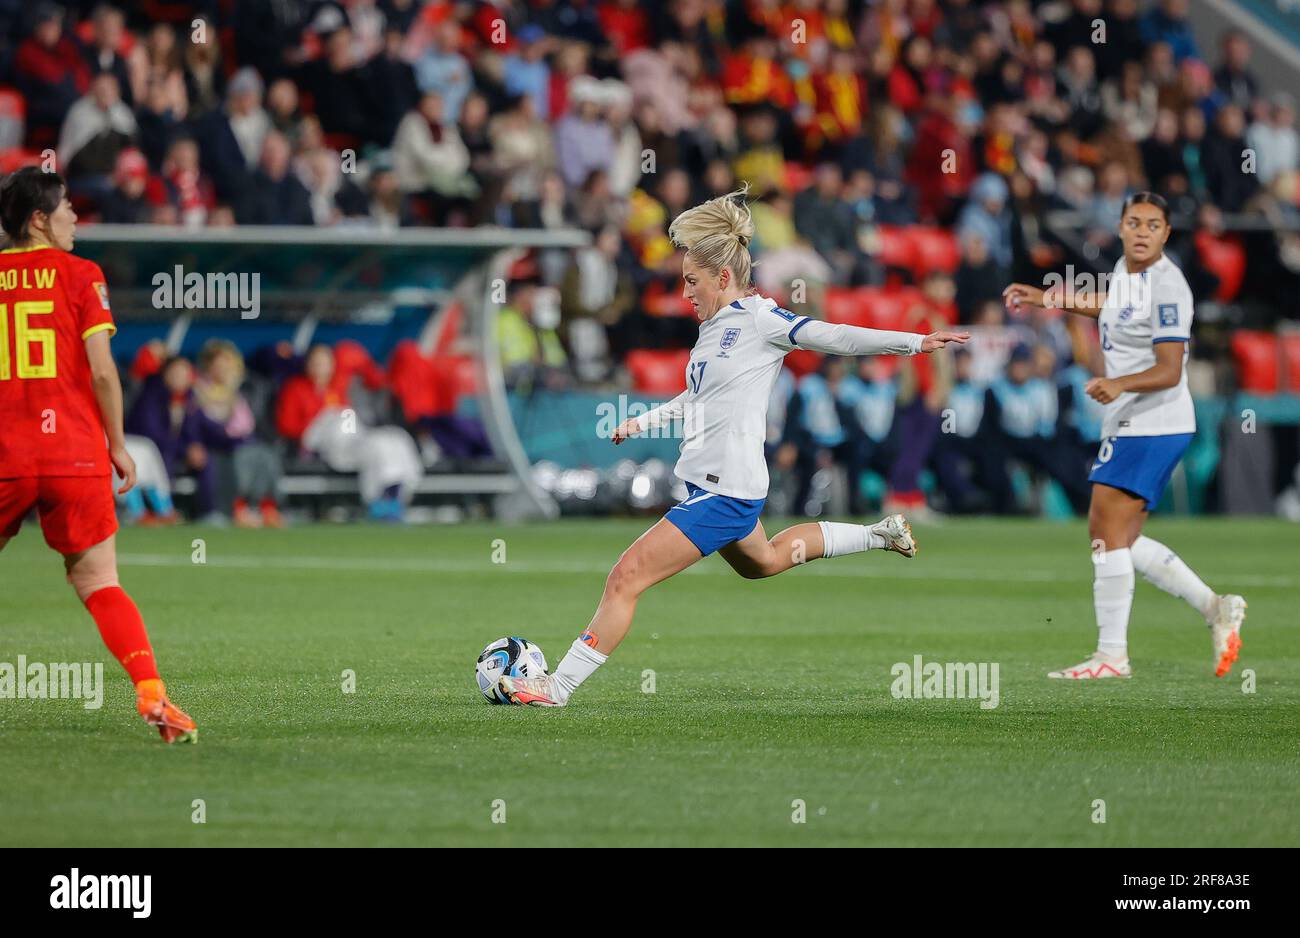 Adelaide/Tarntanya, Australia, 1st August 2023, FIFA Women's World Cup (Group D - Match #39) England vs China, Laura COOMS pushes England into attack against China PR  Credit: Mark Willoughby/Alamy Live News Stock Photo